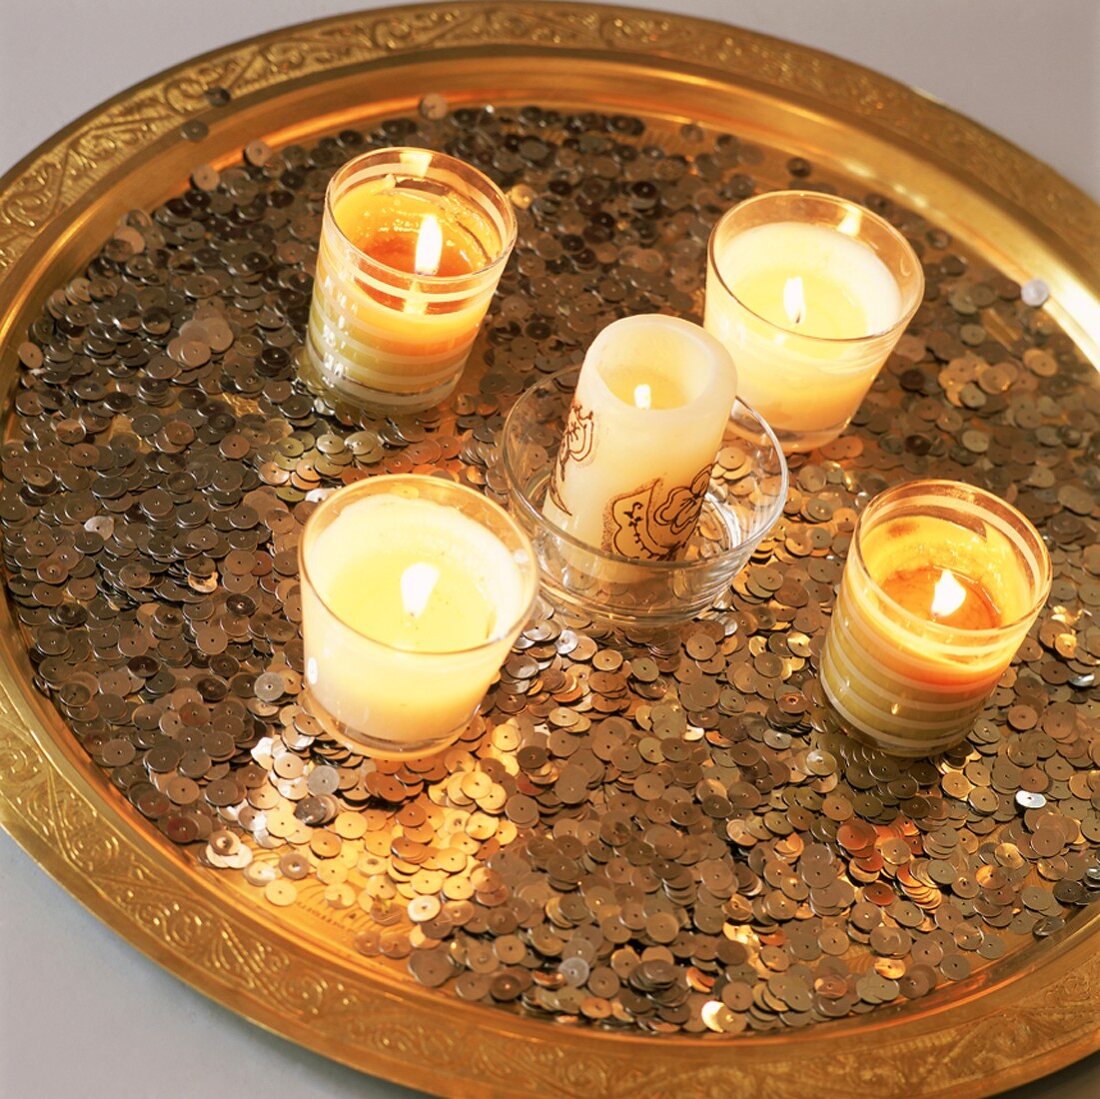 Lit candles on tray